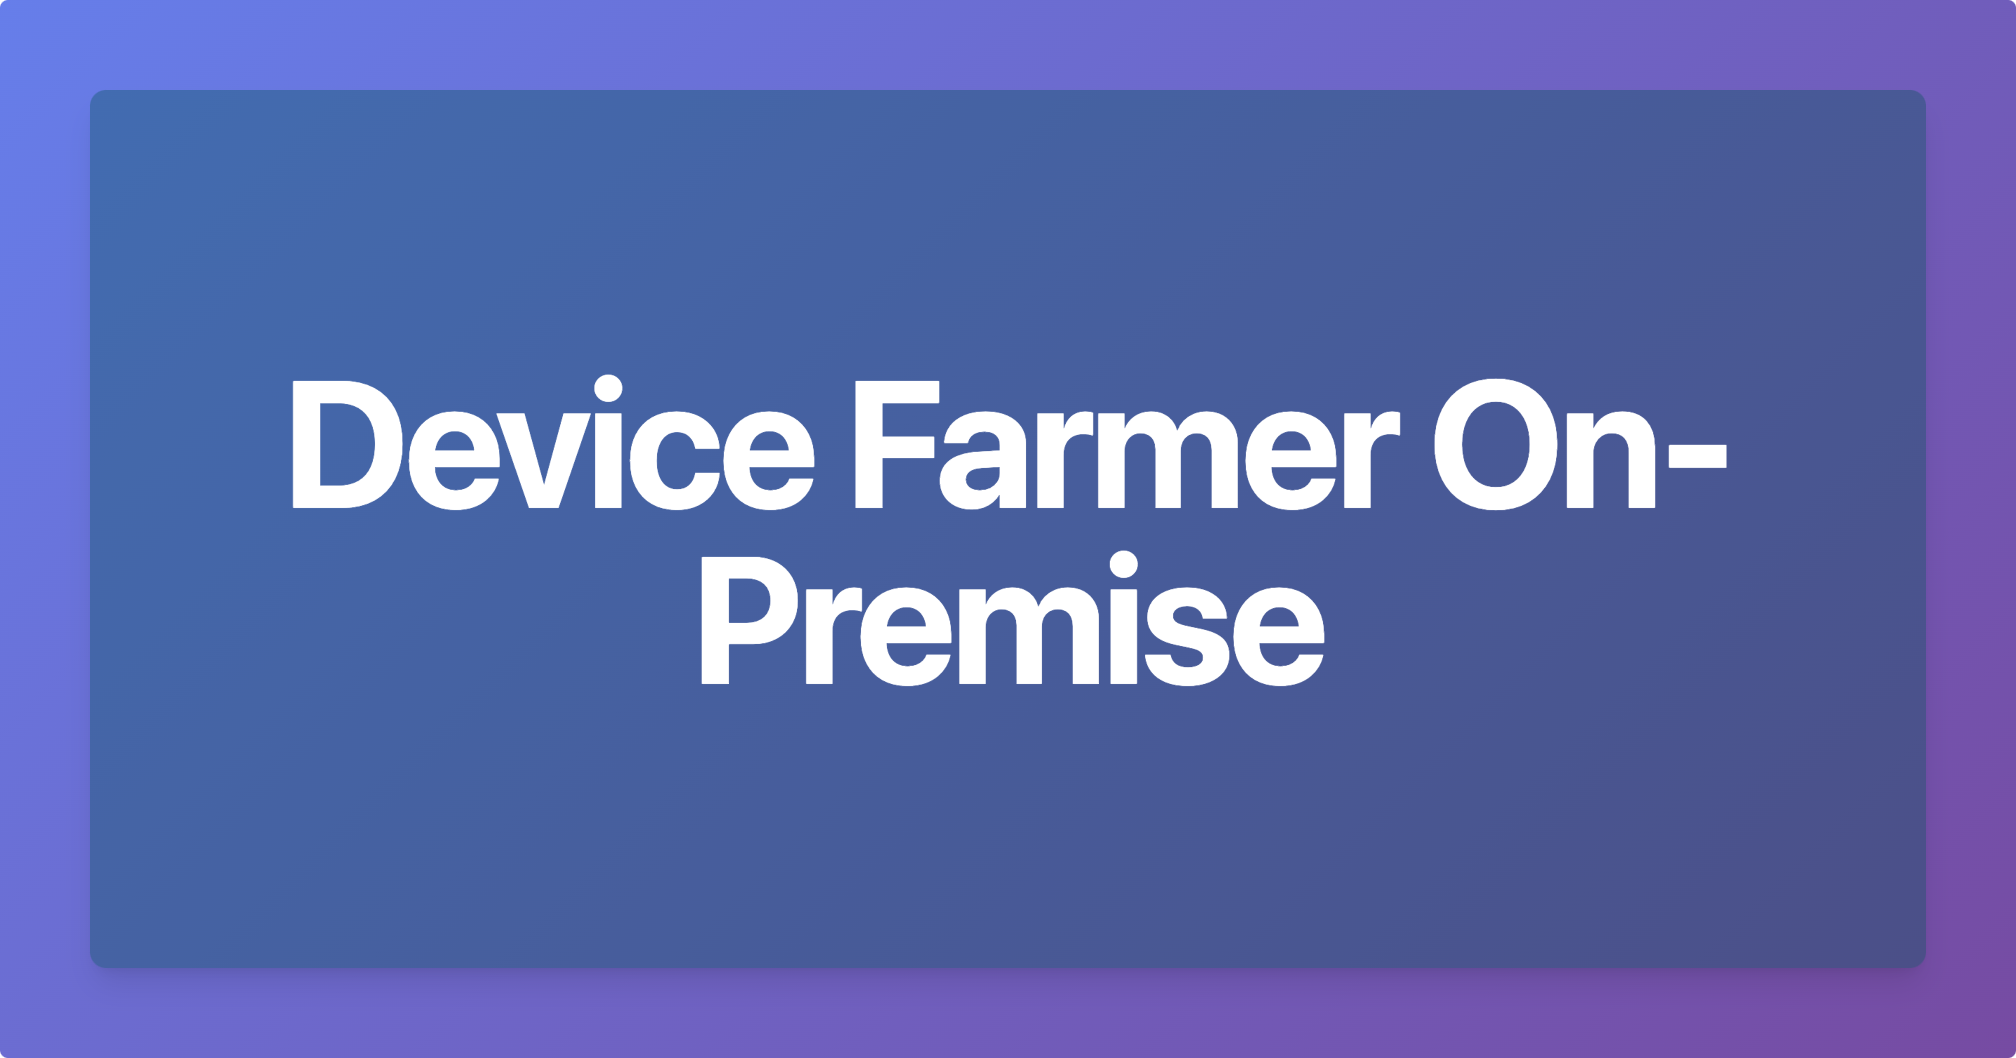 Product Device Farm yang support On Premise
